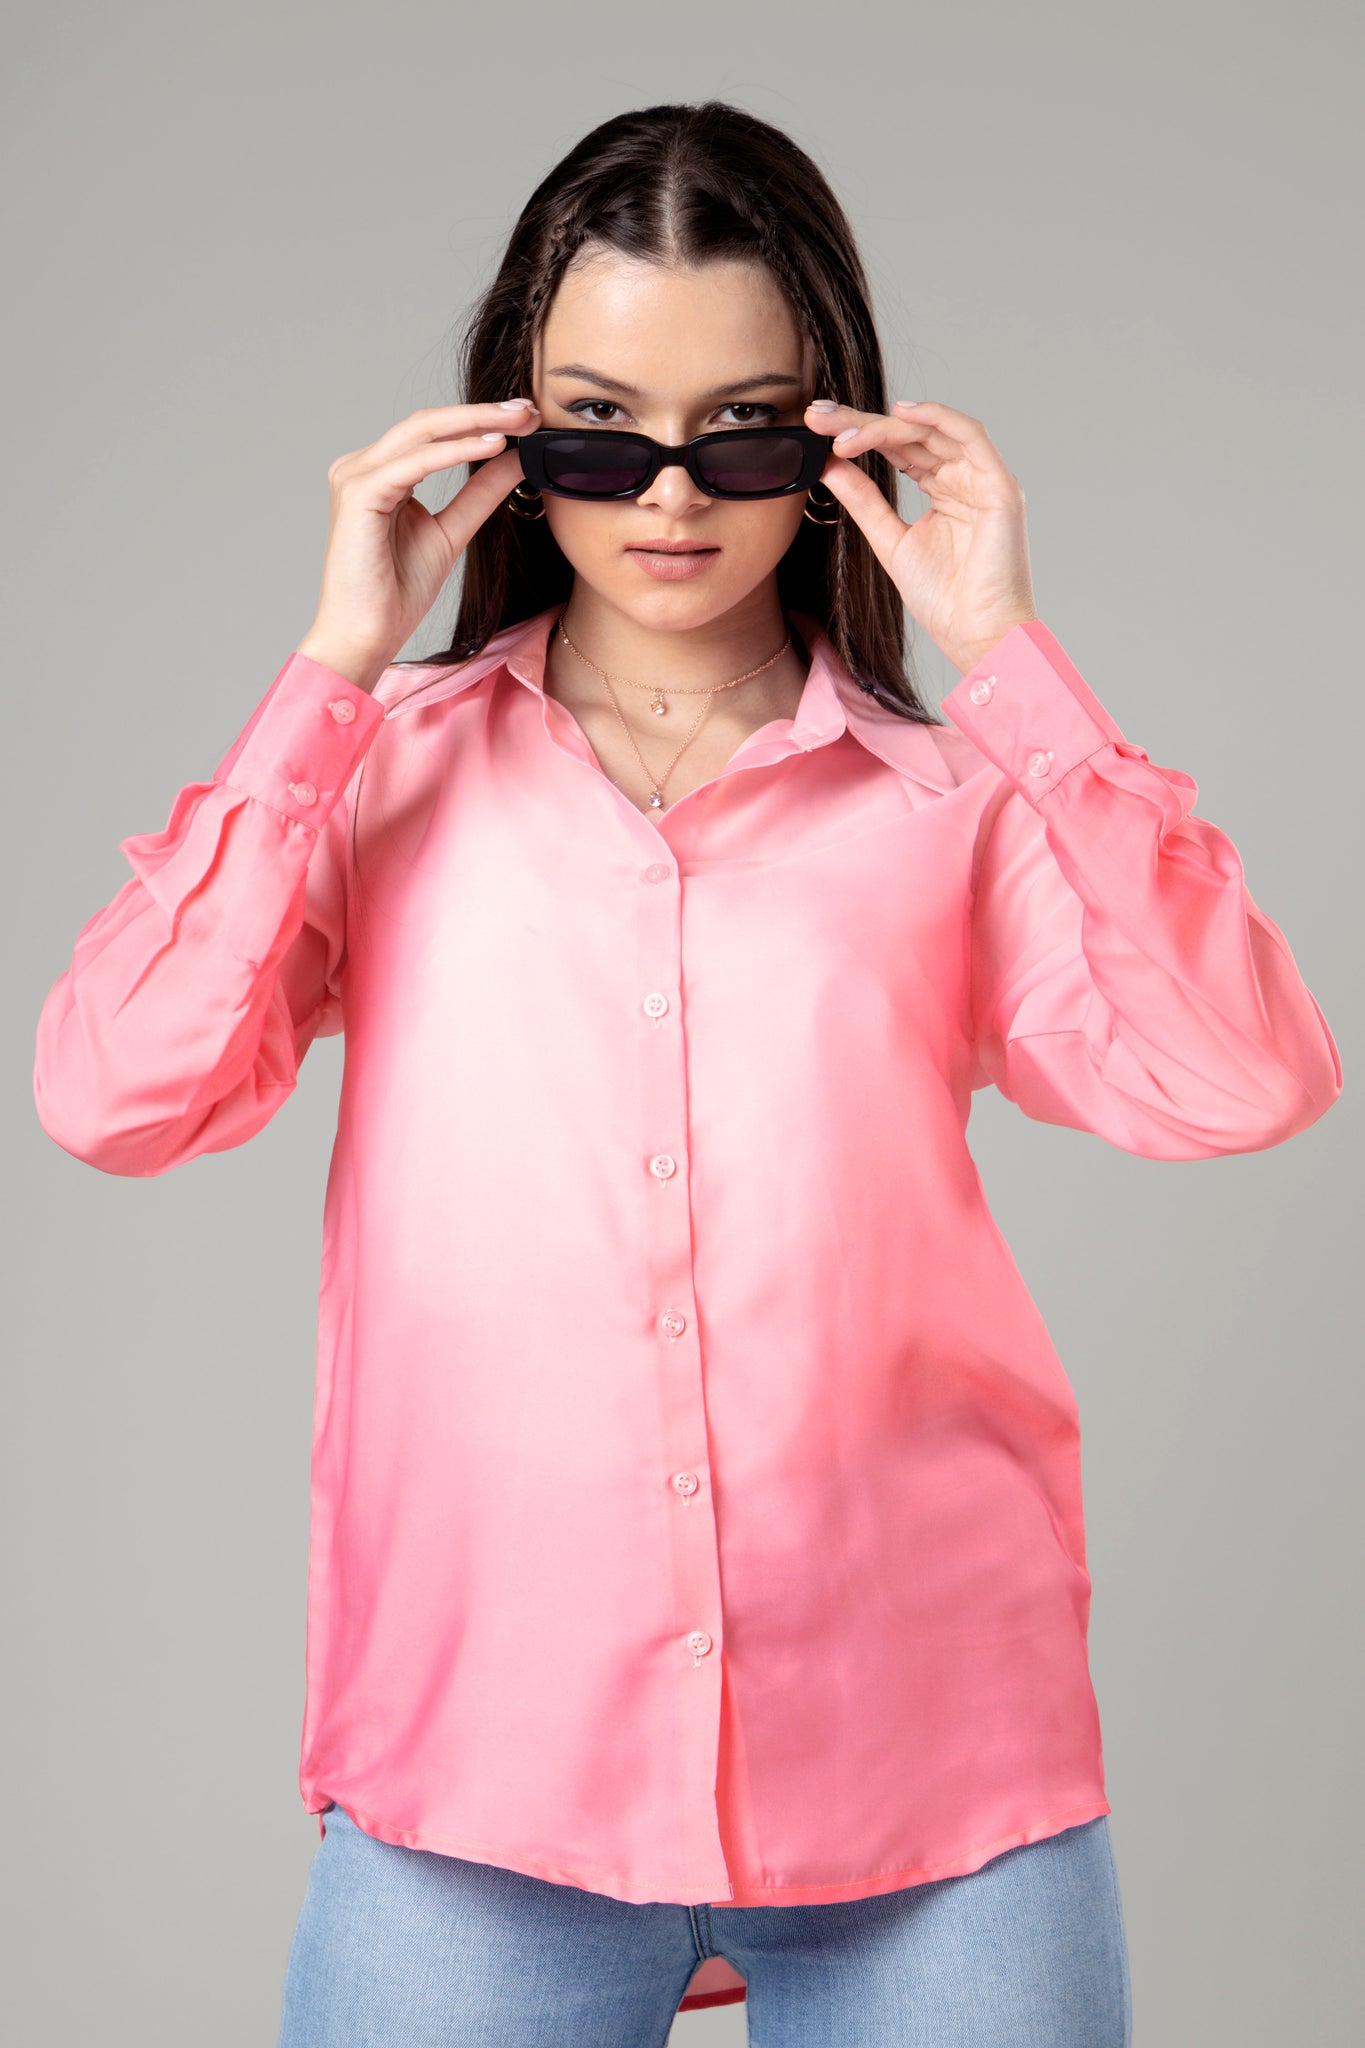 Trendy Pink Ombre Shirt For Women